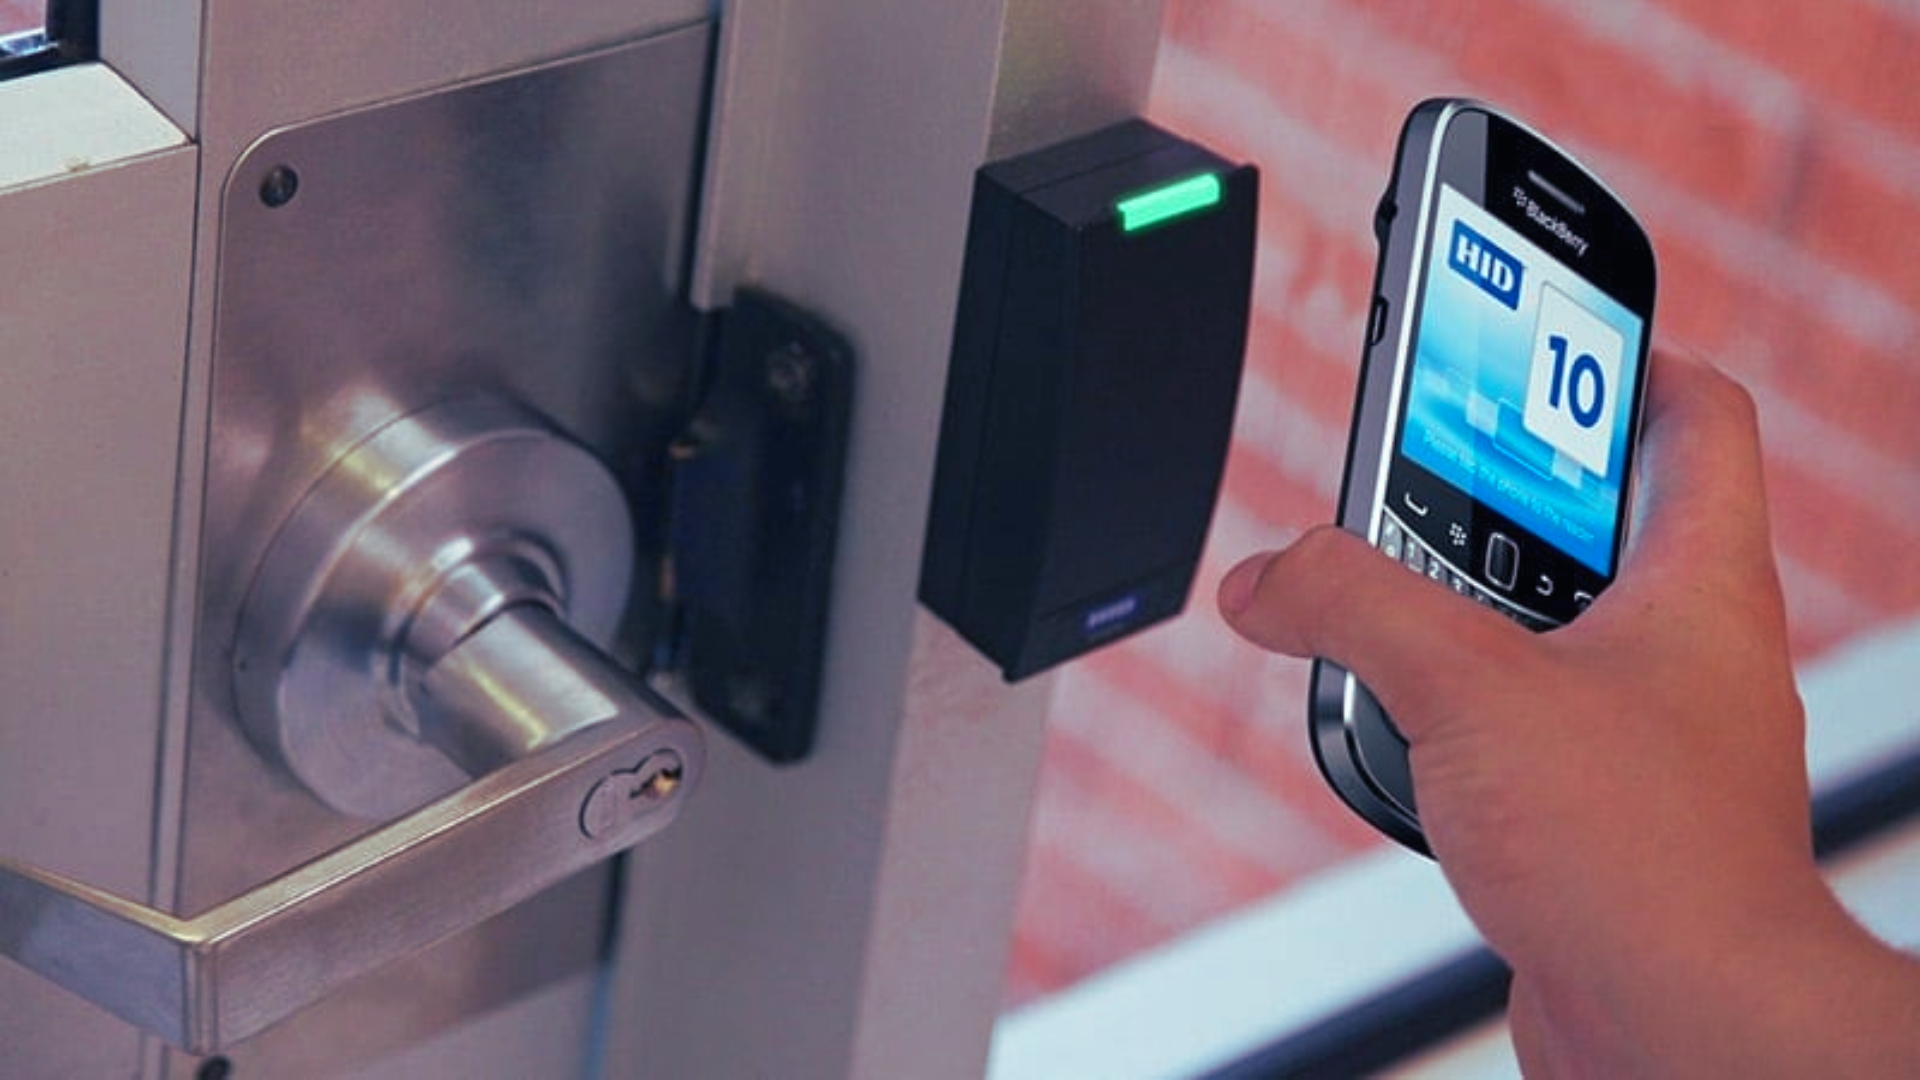 A user unlocking a high-security lock using the smartphone